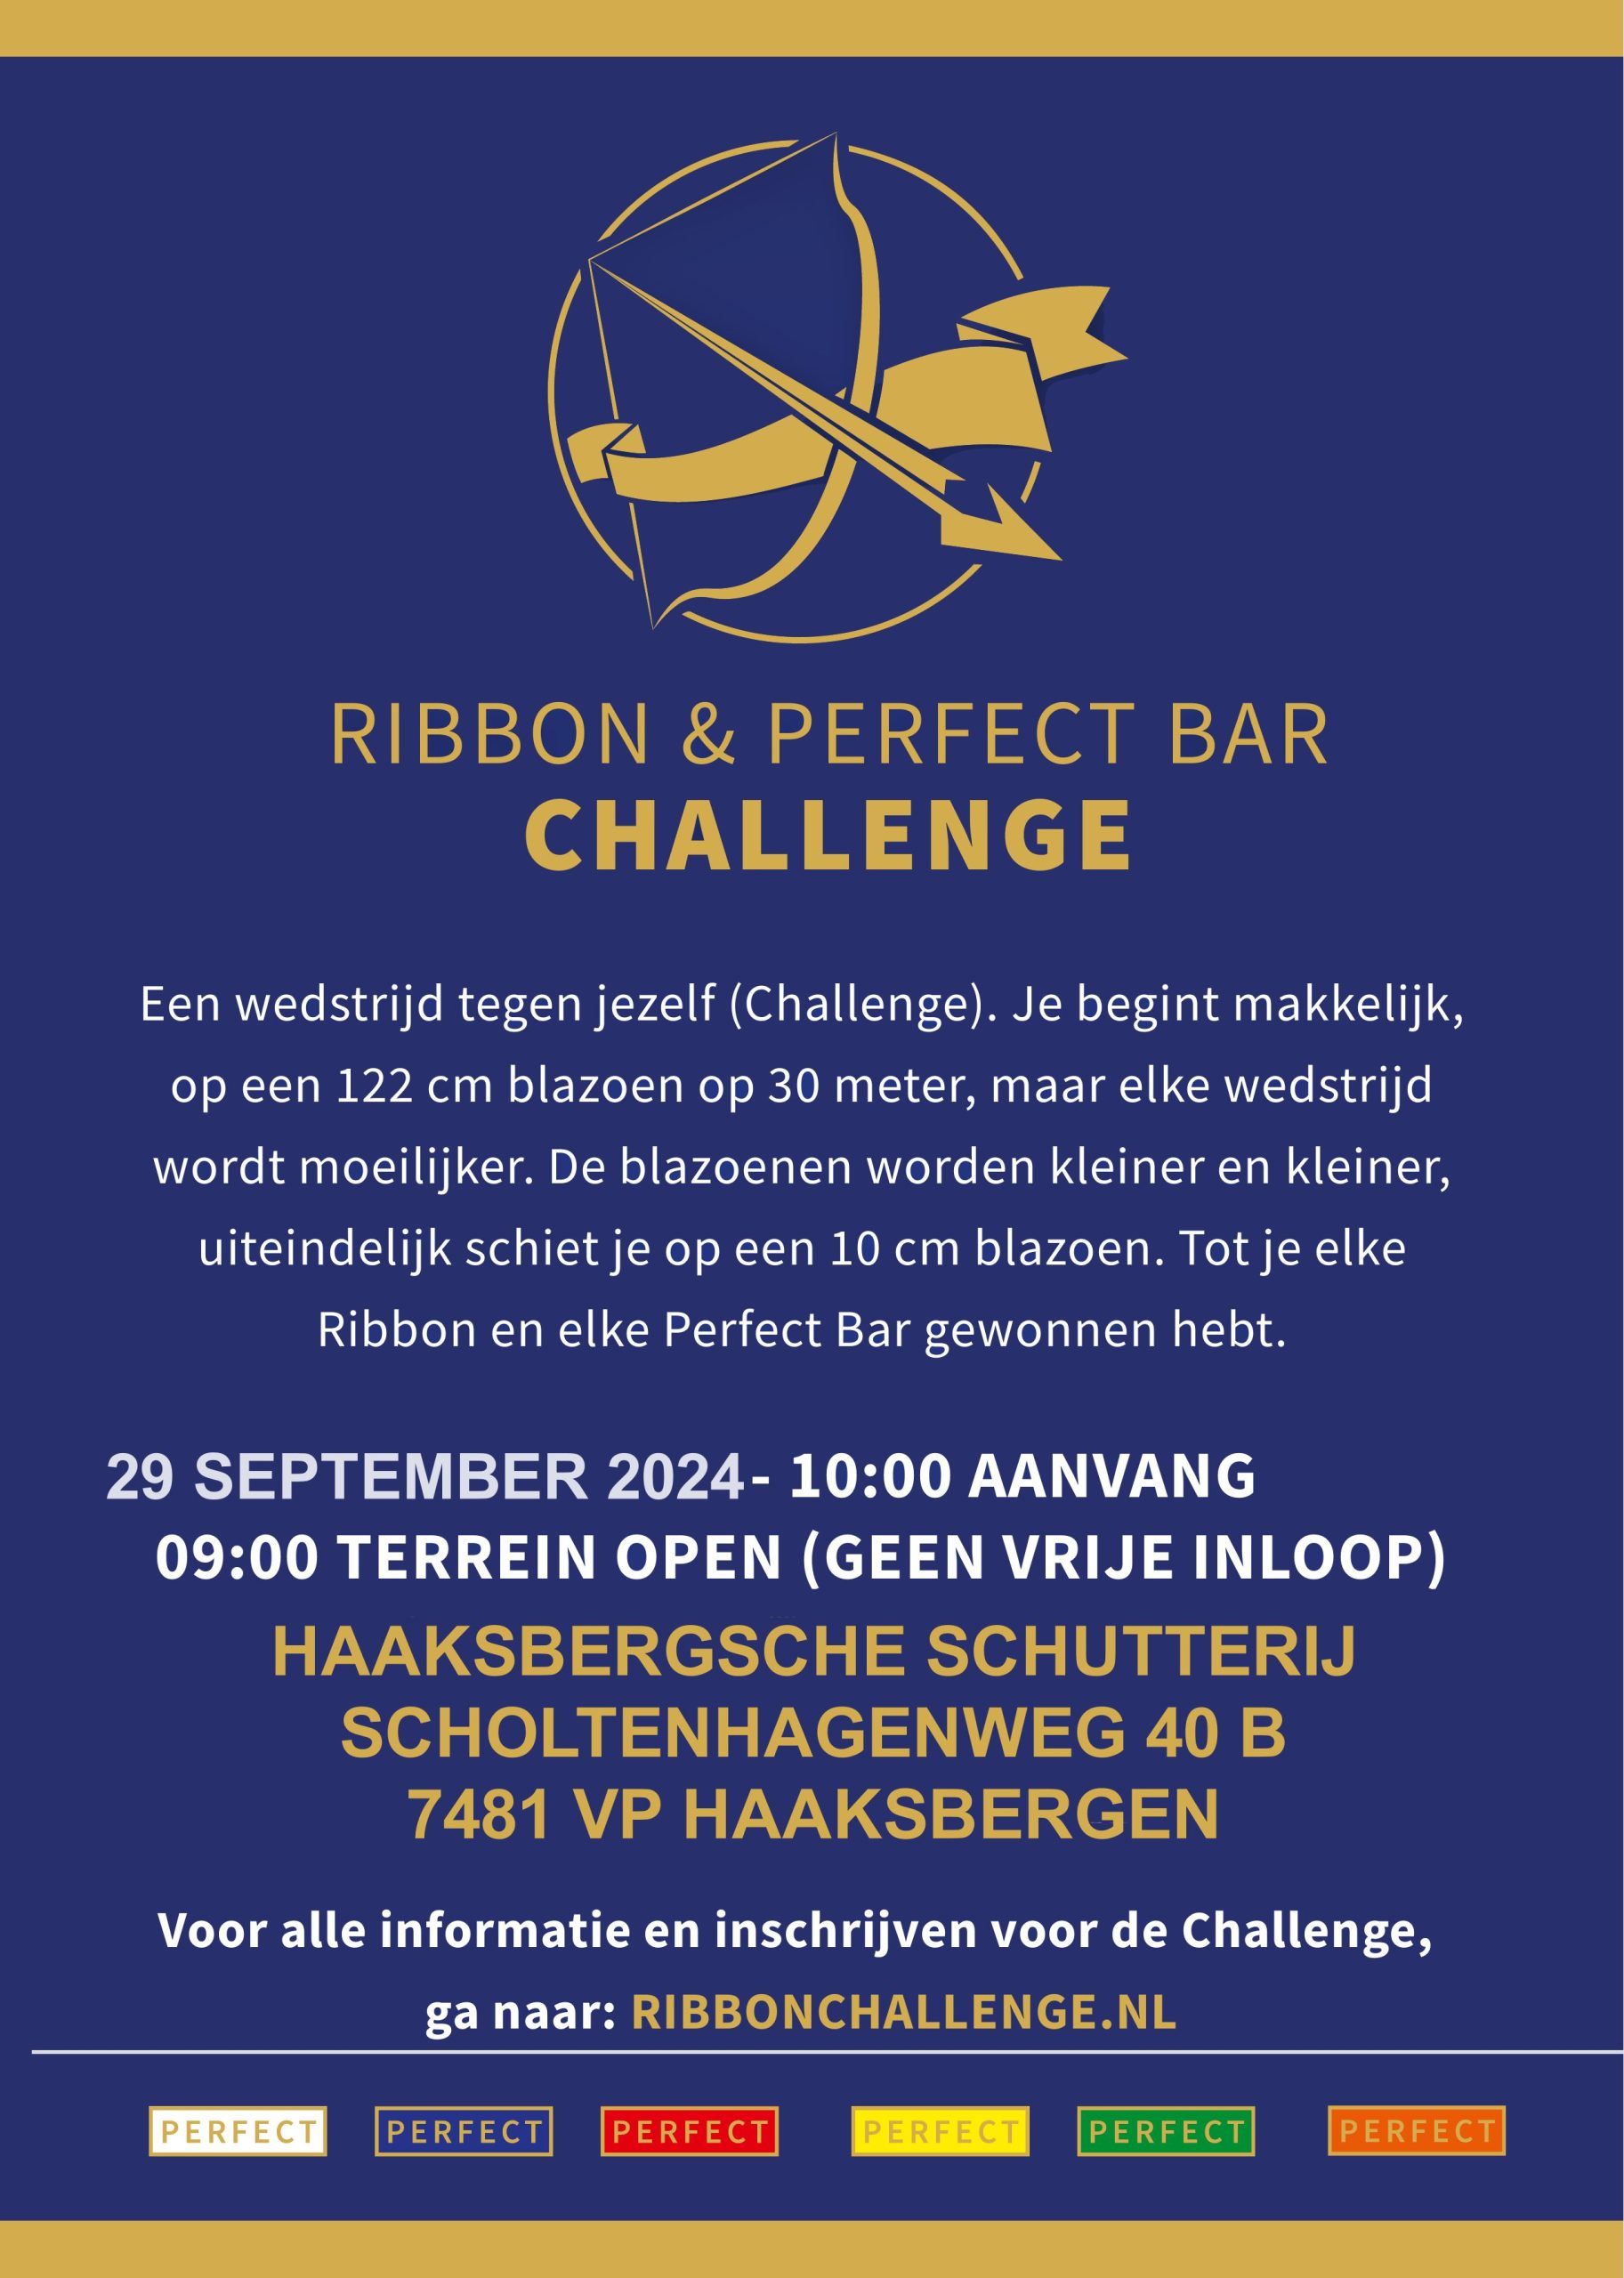 Ribbon and Perfect Bar Challenge Haaksbergen